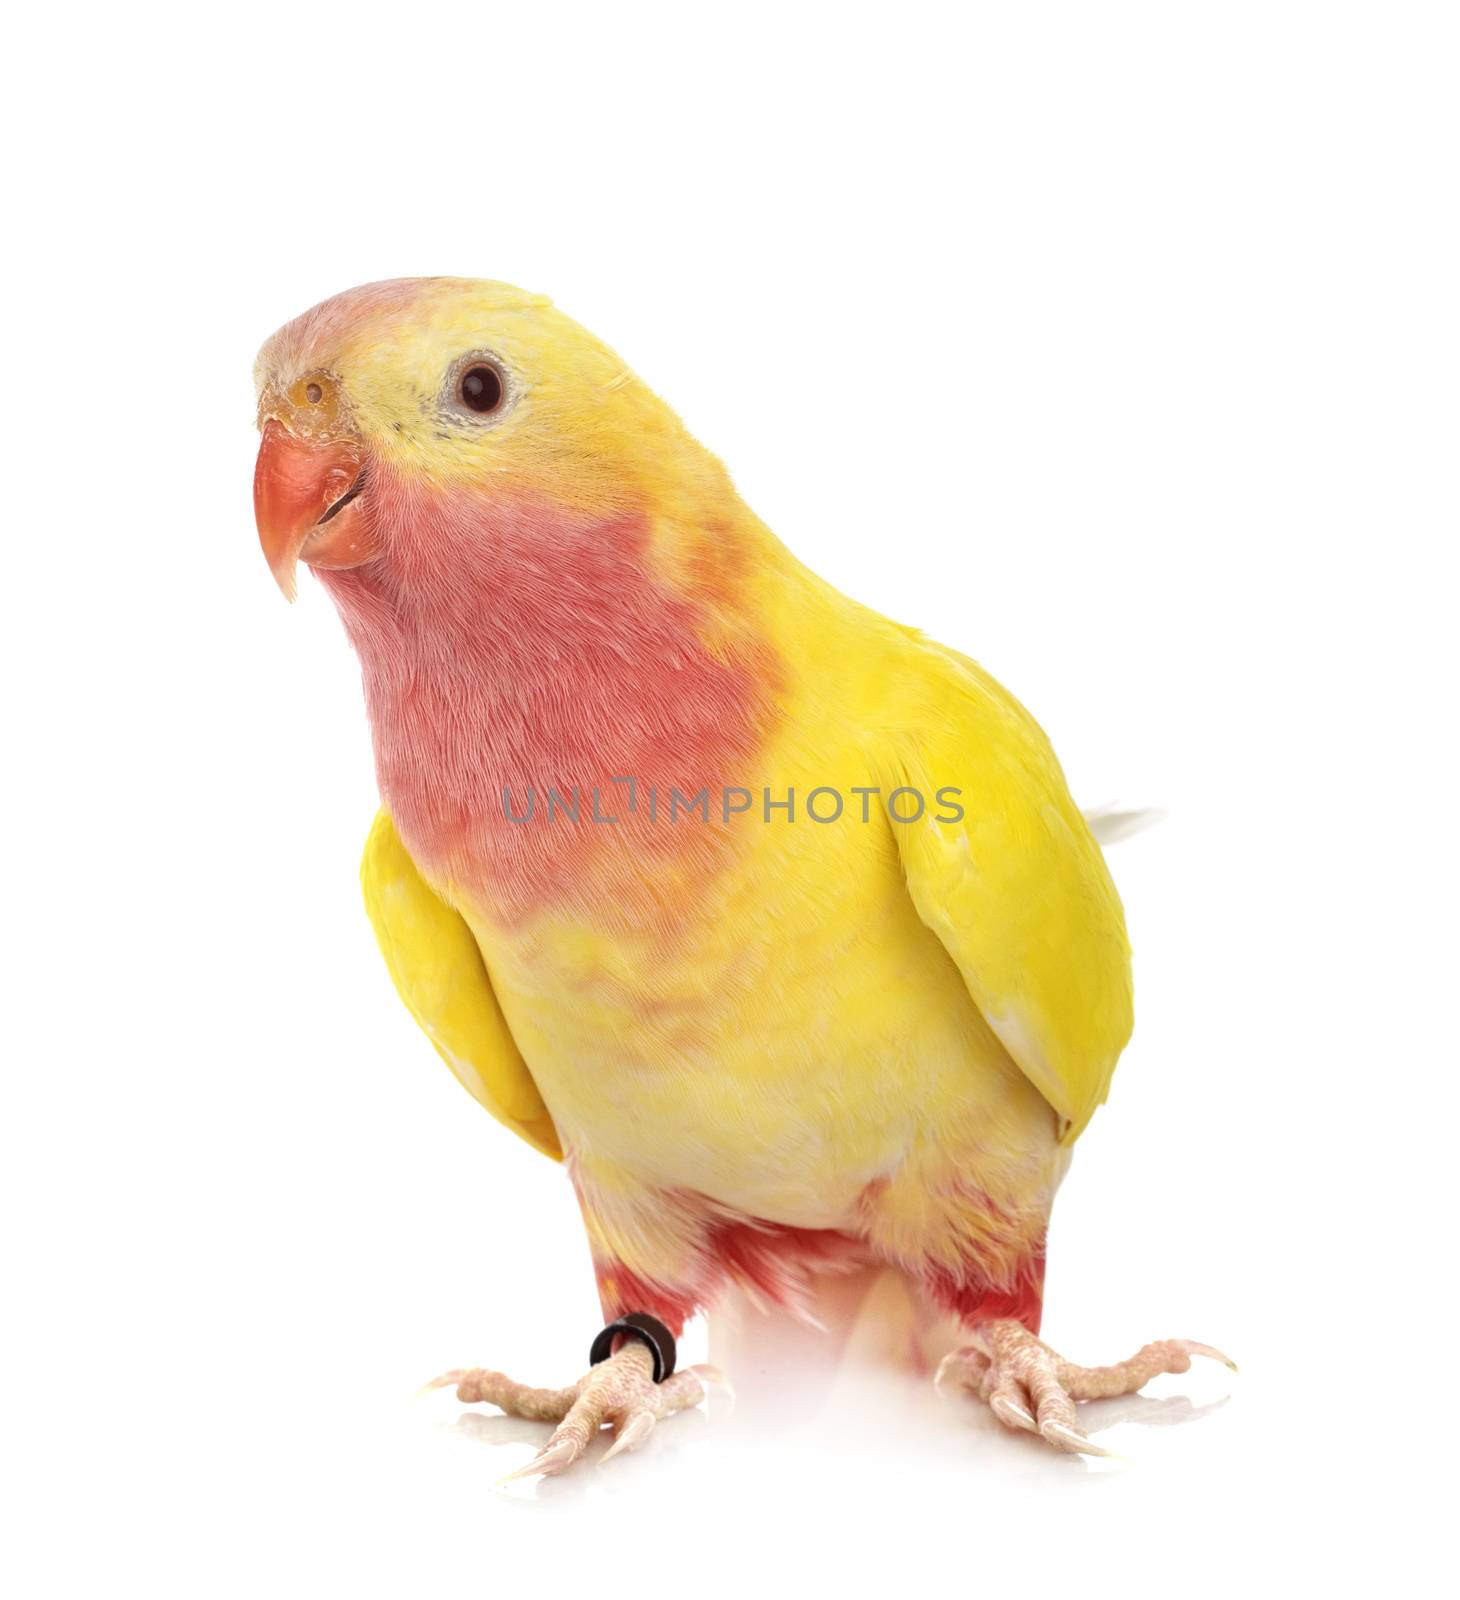 Princess parrot in front of white background